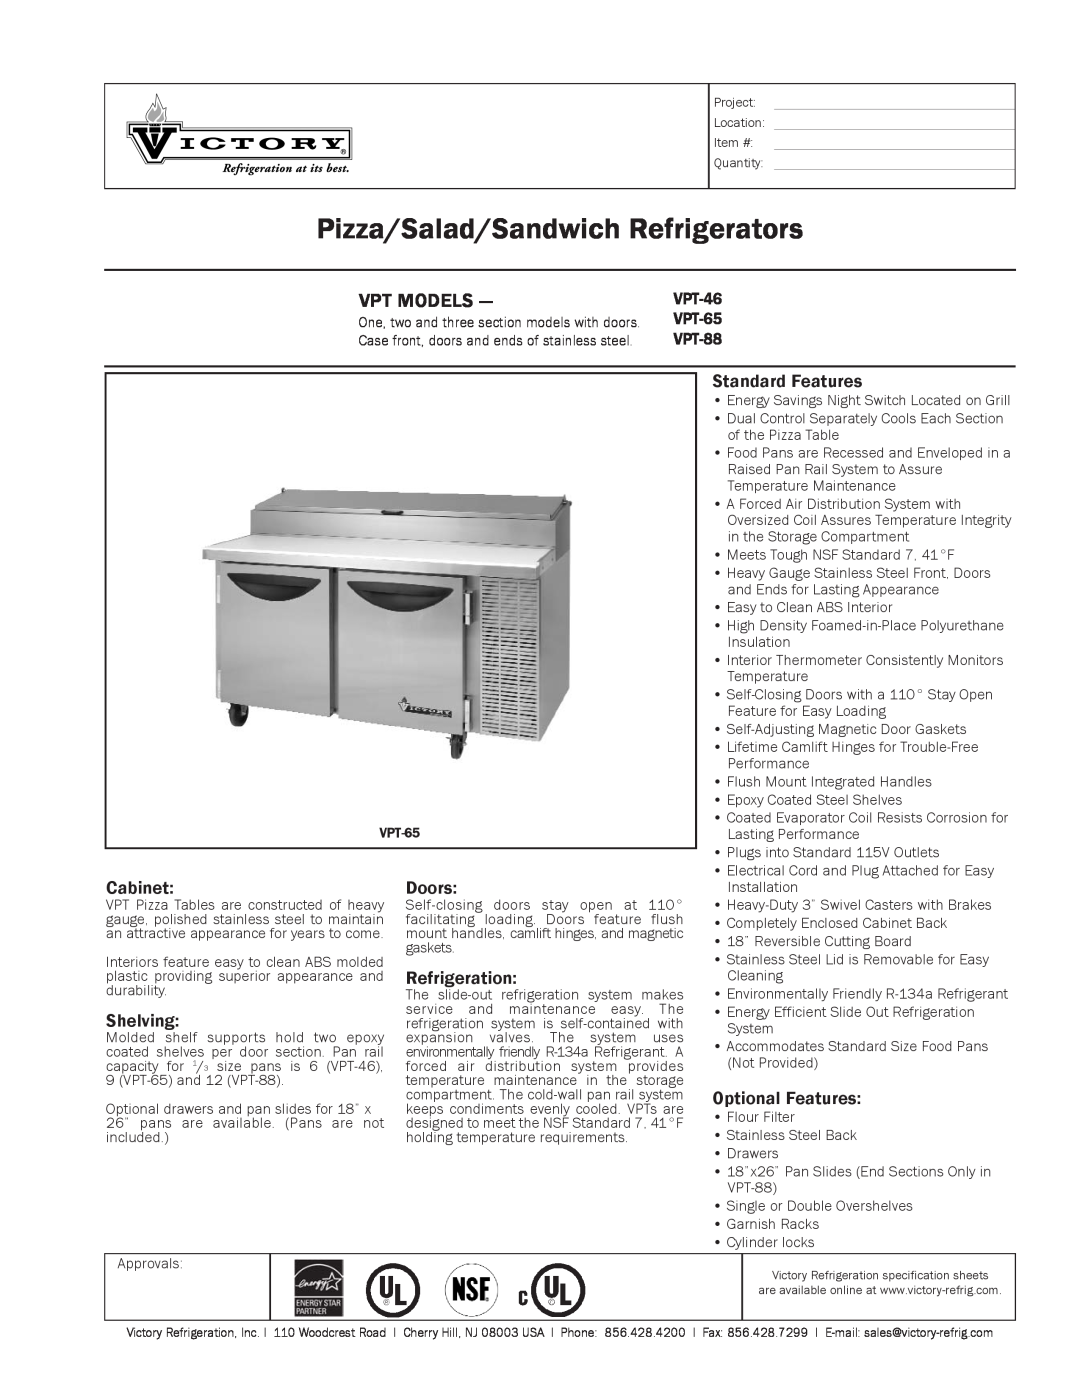 Victory Refrigeration VPT-46 specifications Pizza/Salad/Sandwich Refrigerators, Standard Features, Cabinet, Doors 